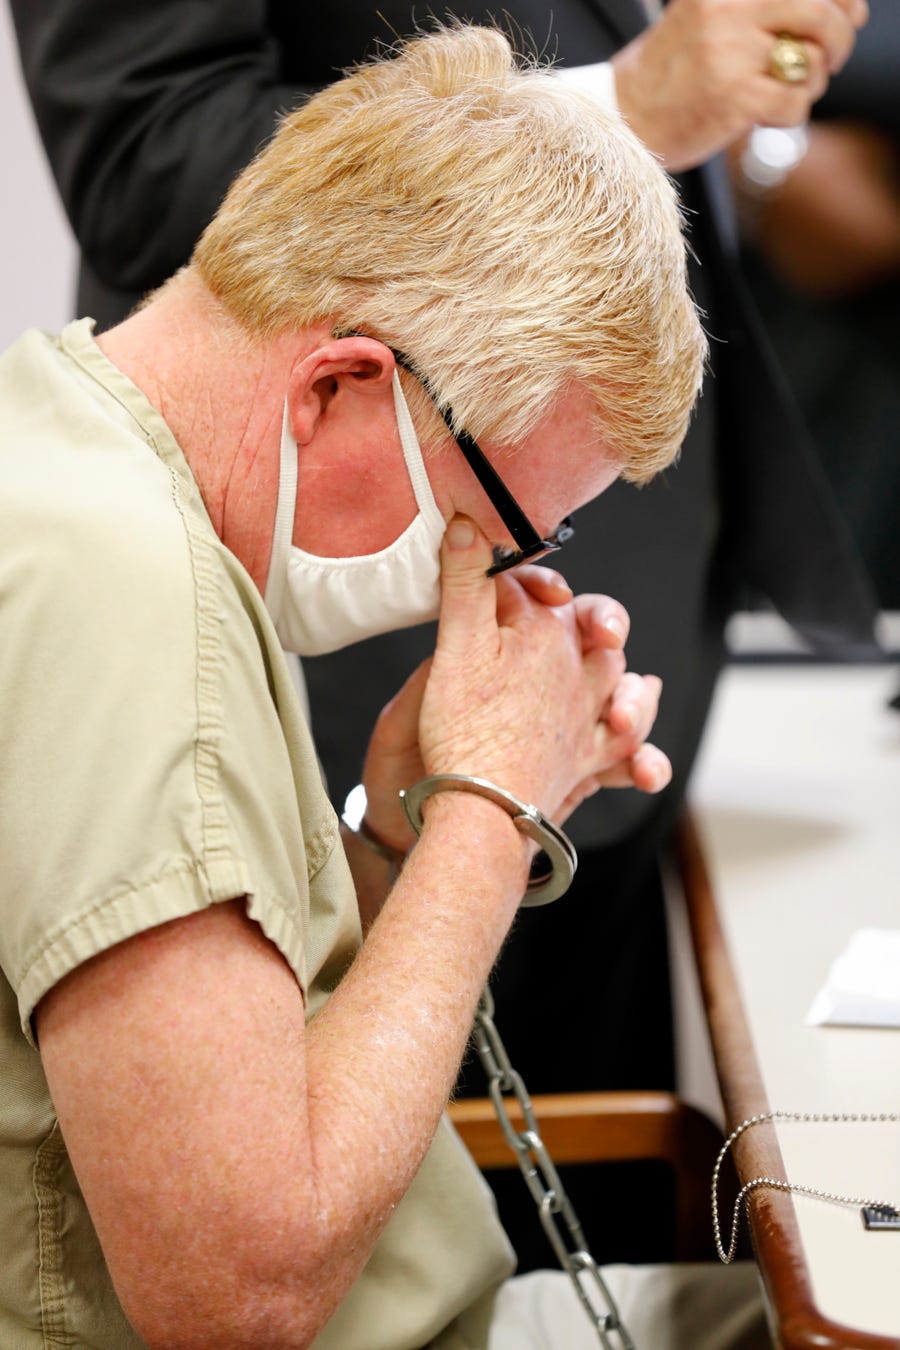 Alex Murdaugh weeps during his bond hearing, Thursday, Sept. 16, 2021, in Varnville, S.C. Murdaugh surrendered Thursday to face insurance fraud and other charges after state police said he arranged to have himself shot in the head so that his son would get a $10 million life insurance payout.